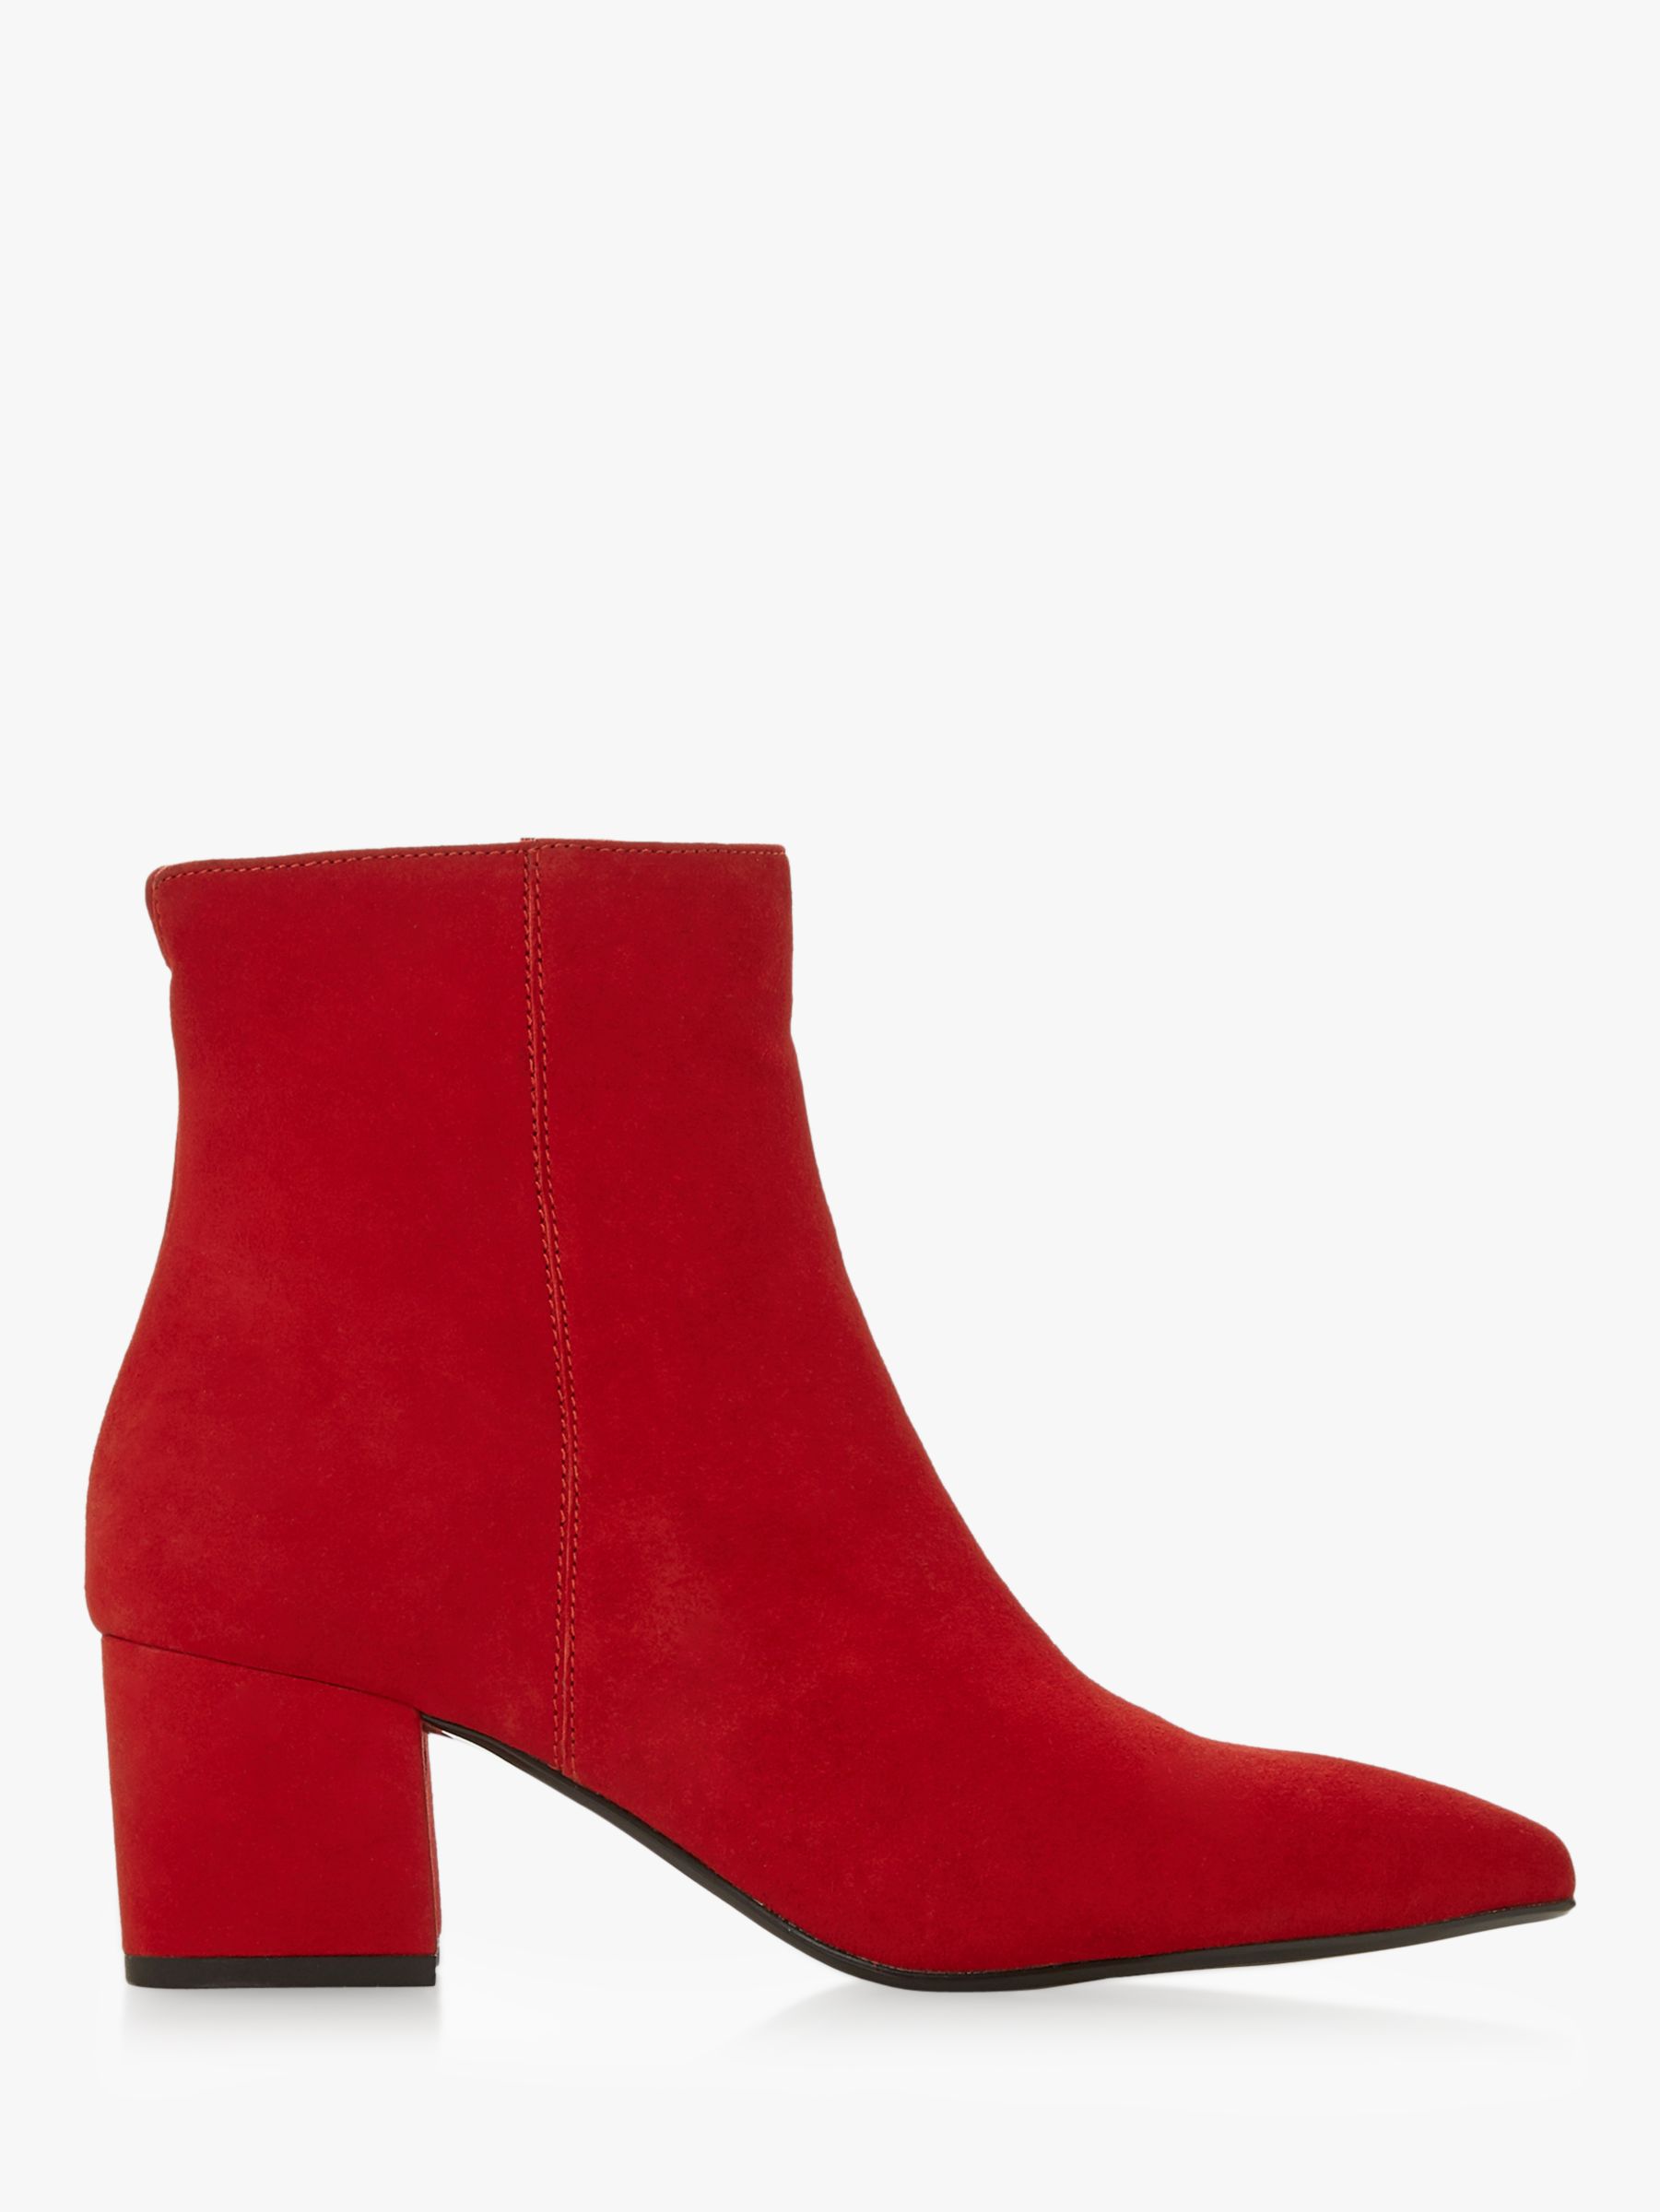 Dune Omarii Block Heel Ankle Boots | Red Suede at John Lewis & Partners